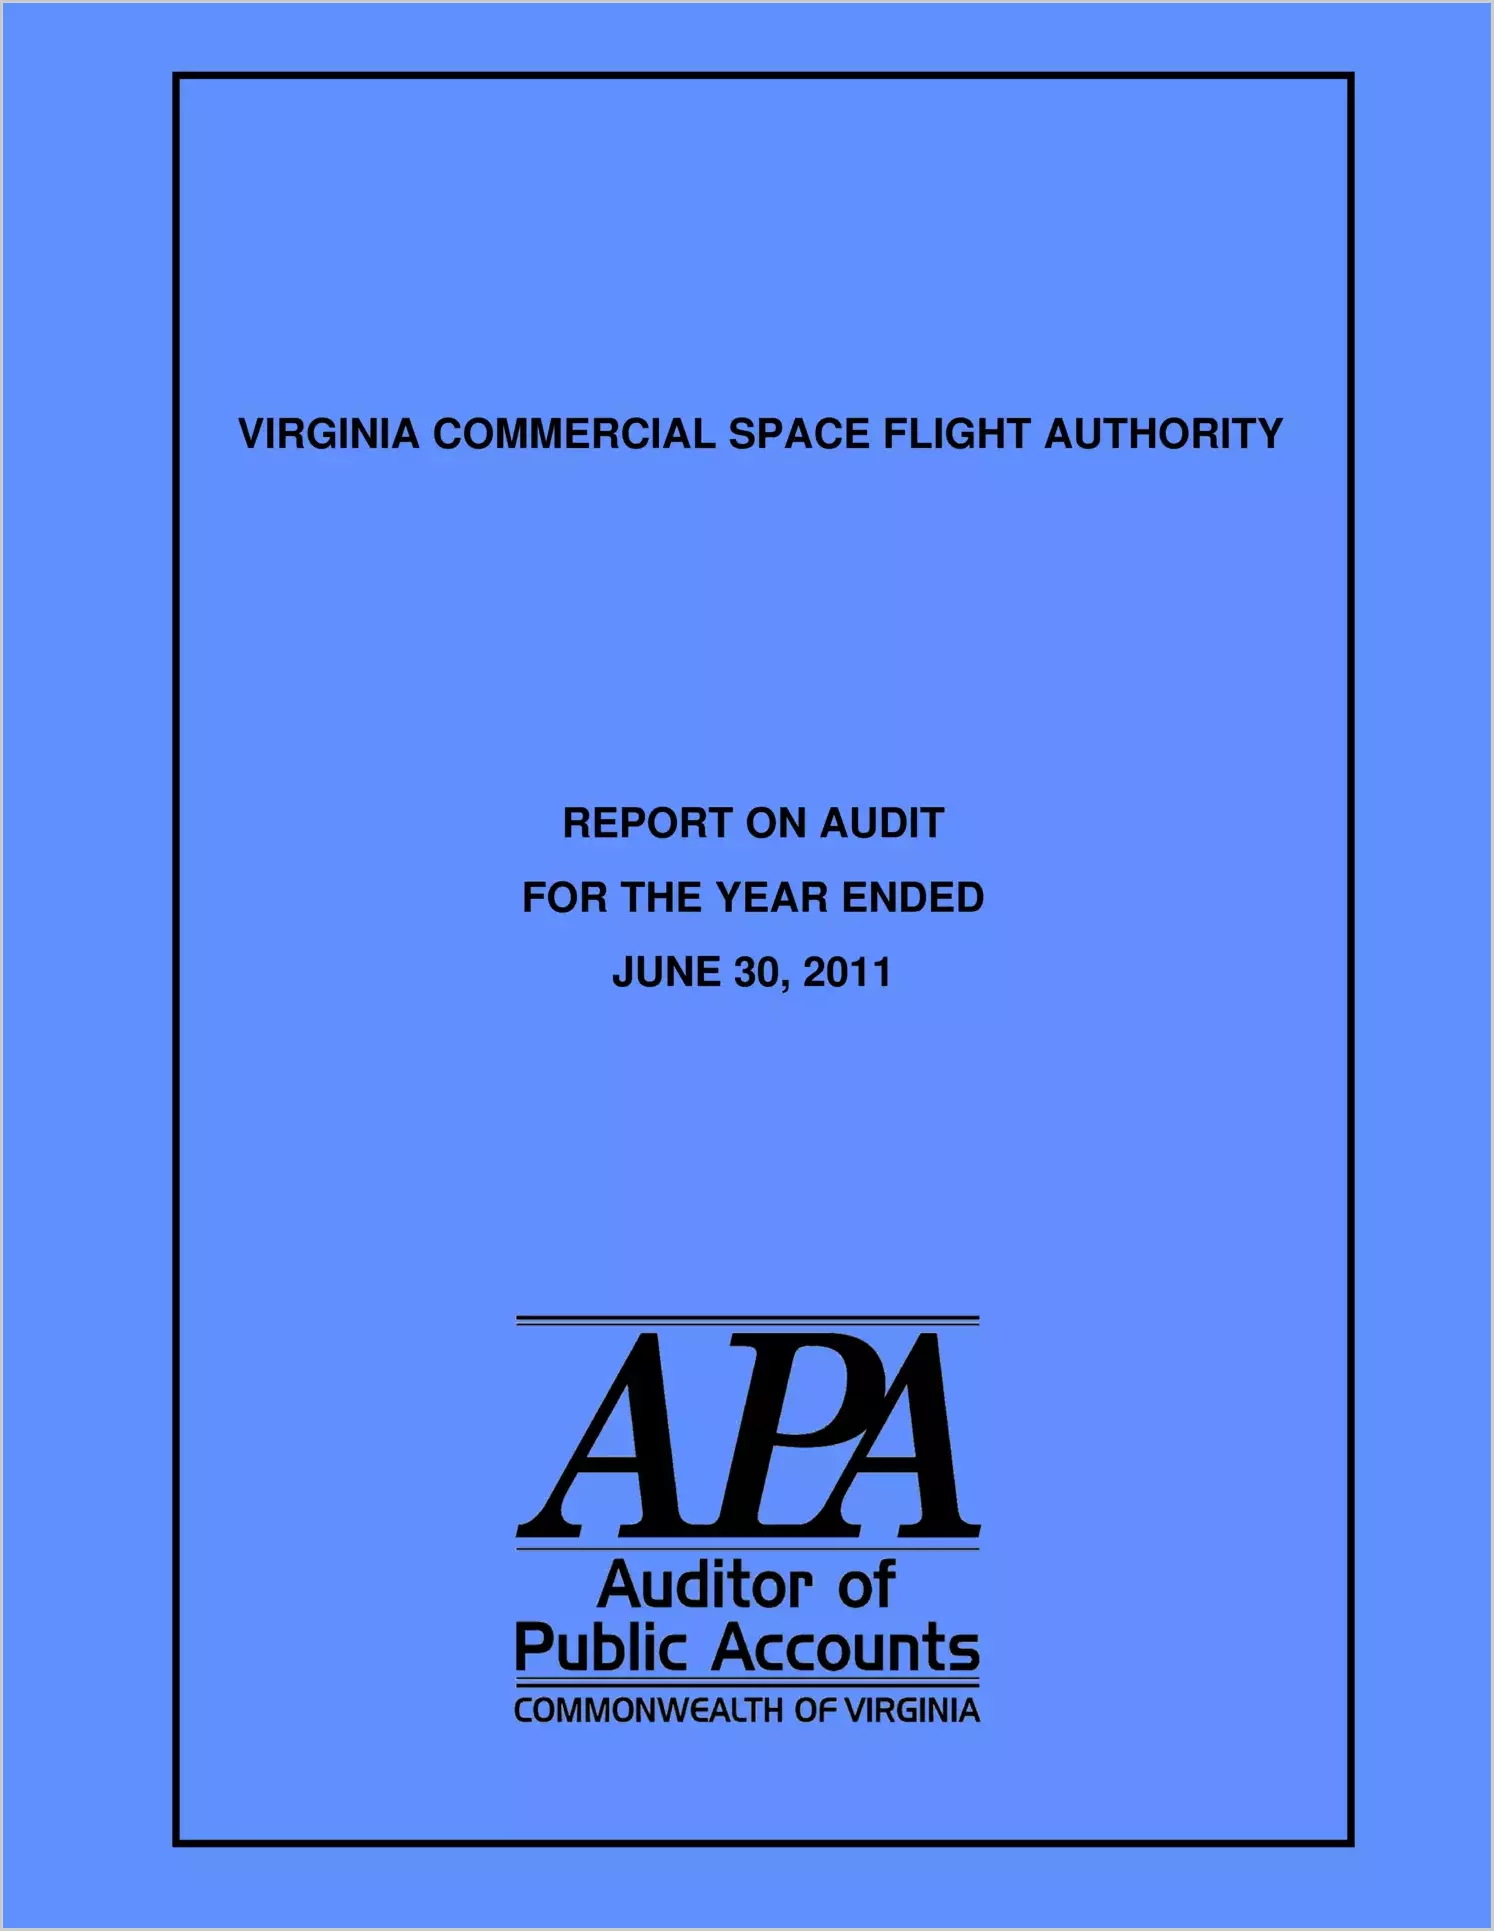 Virginia Commercial Space Flight Authority for the year ended June 30, 2011